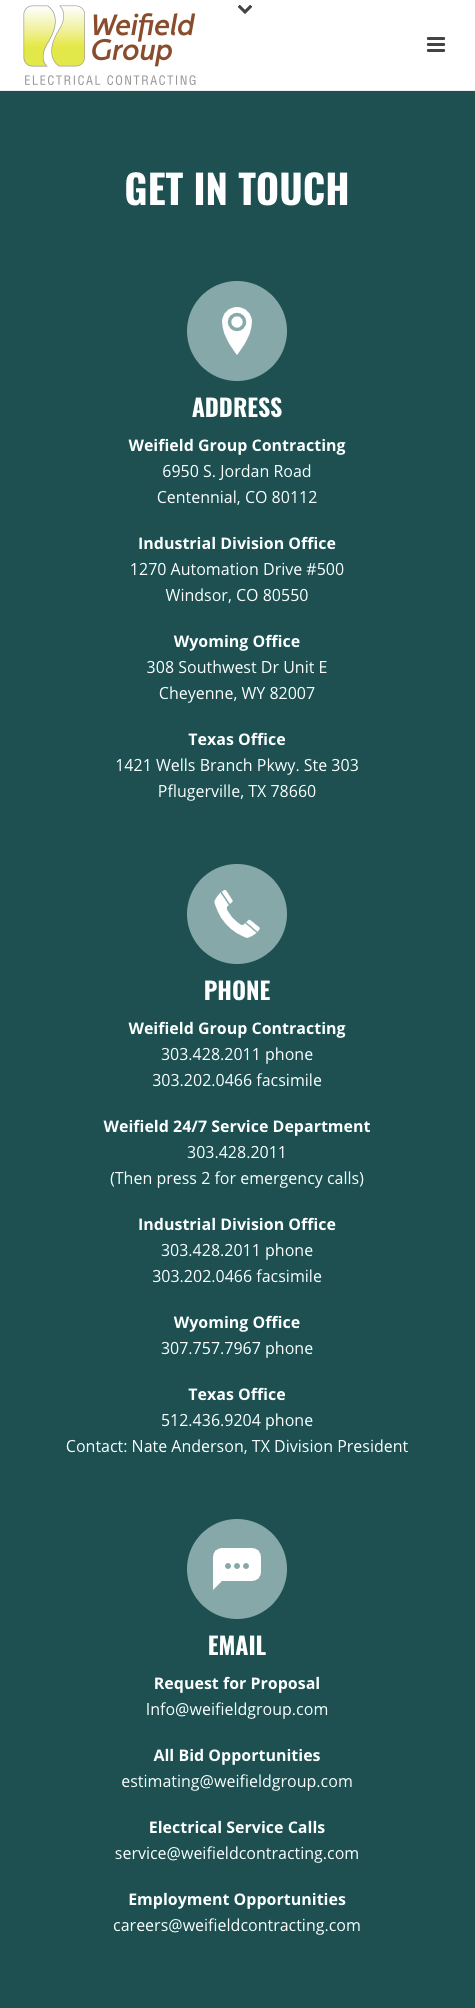 The Weifield Group Mobile View